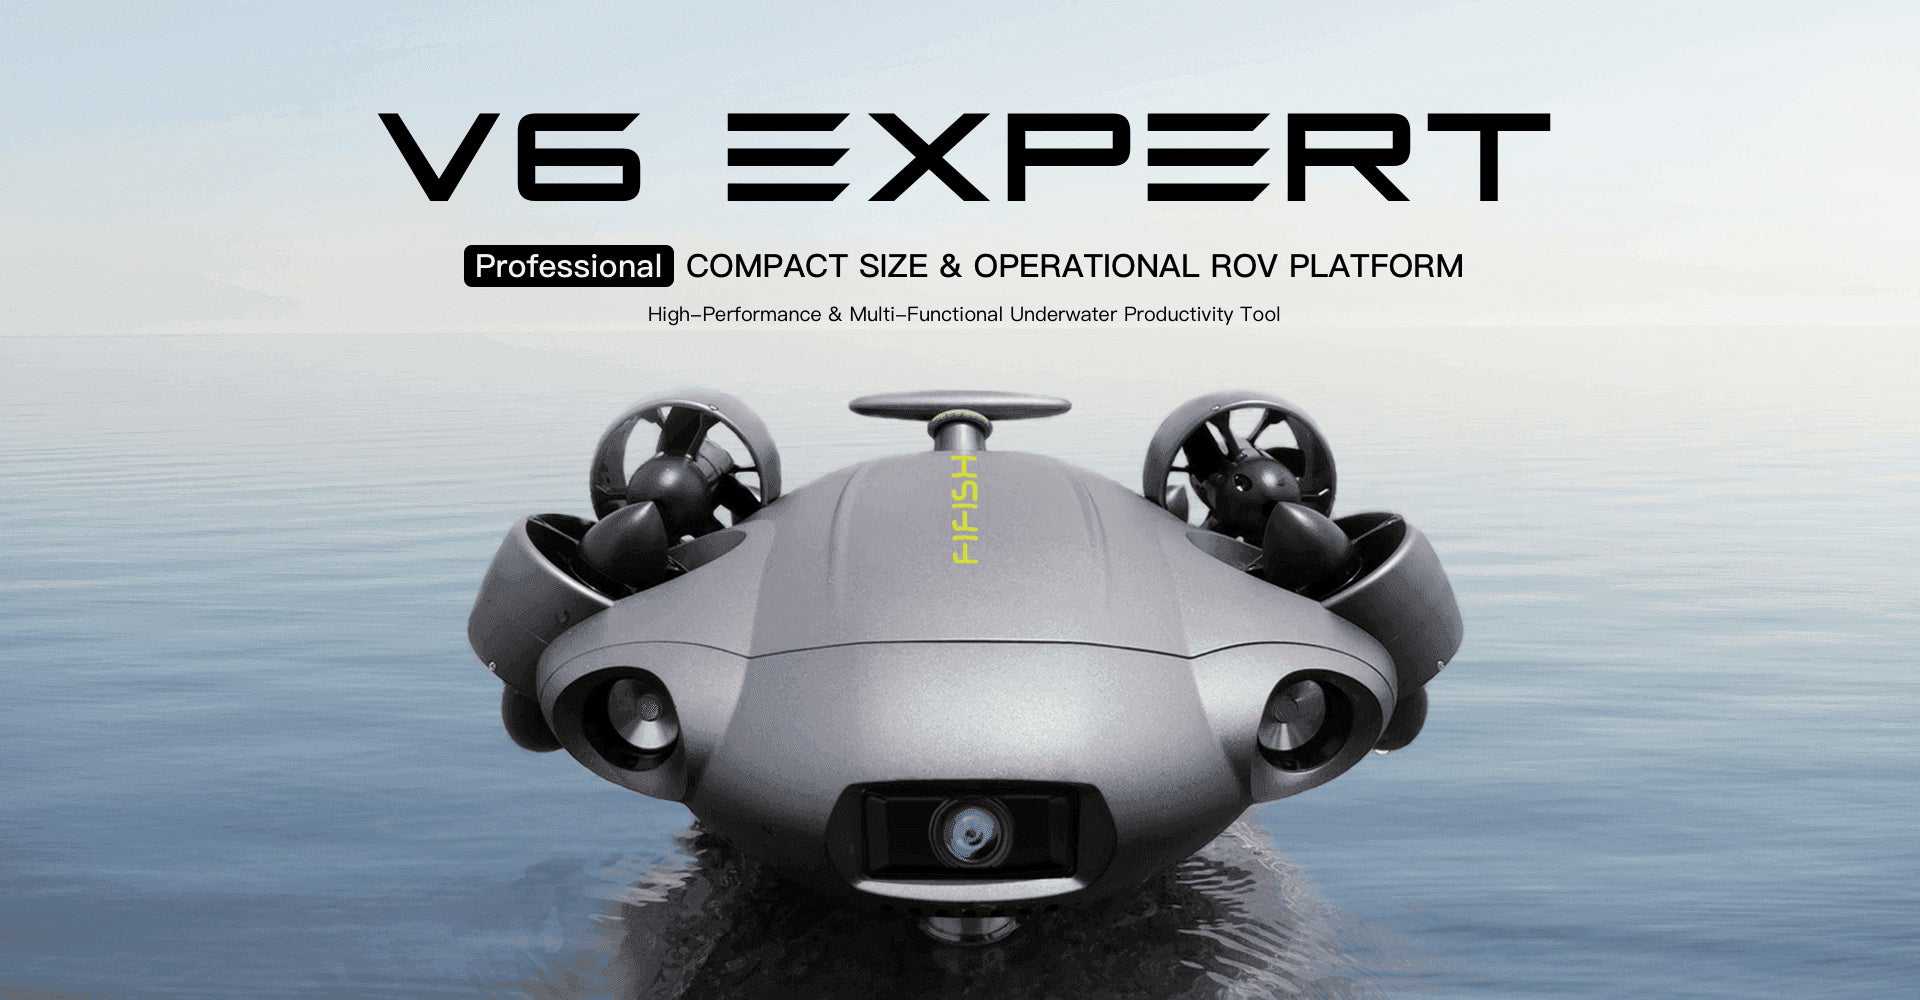 Qysea FIFISH V6 EXPERT Professional Underwater Drone for Productivity15